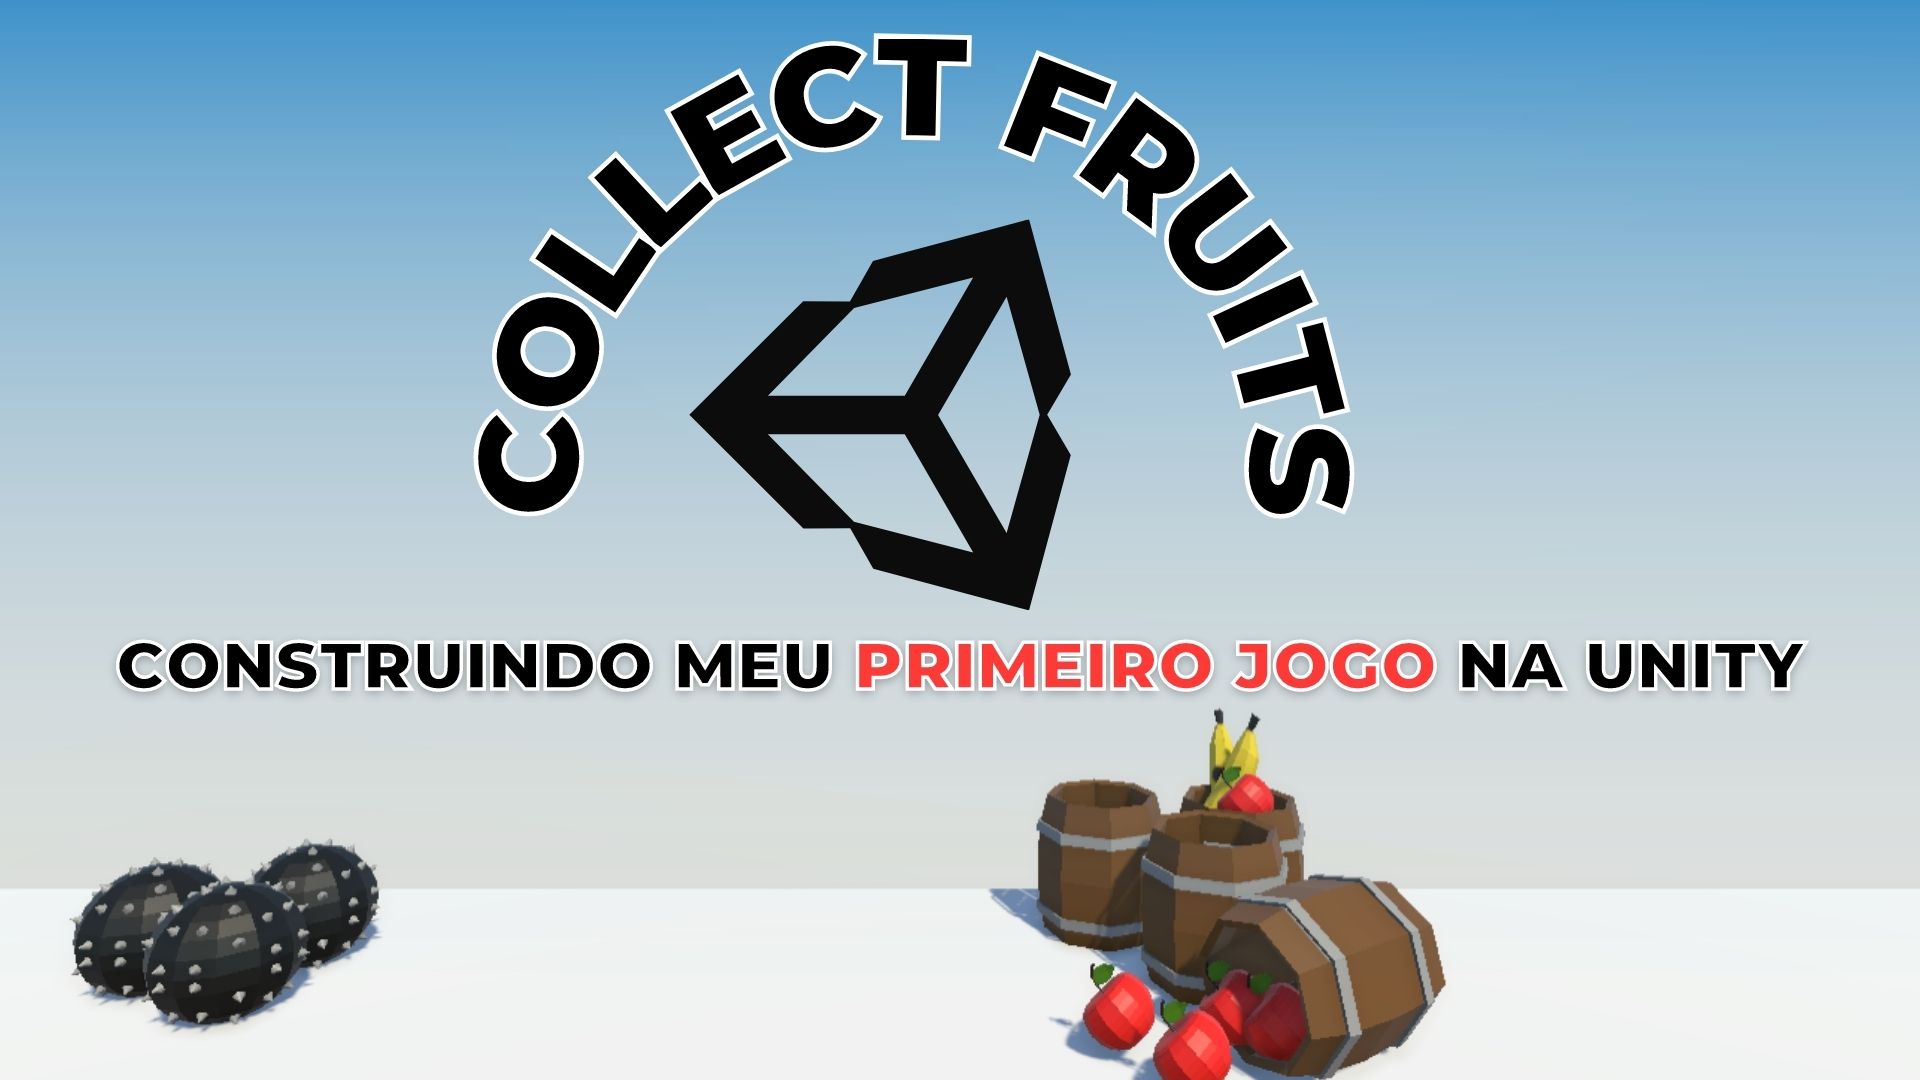 Collect Fruits